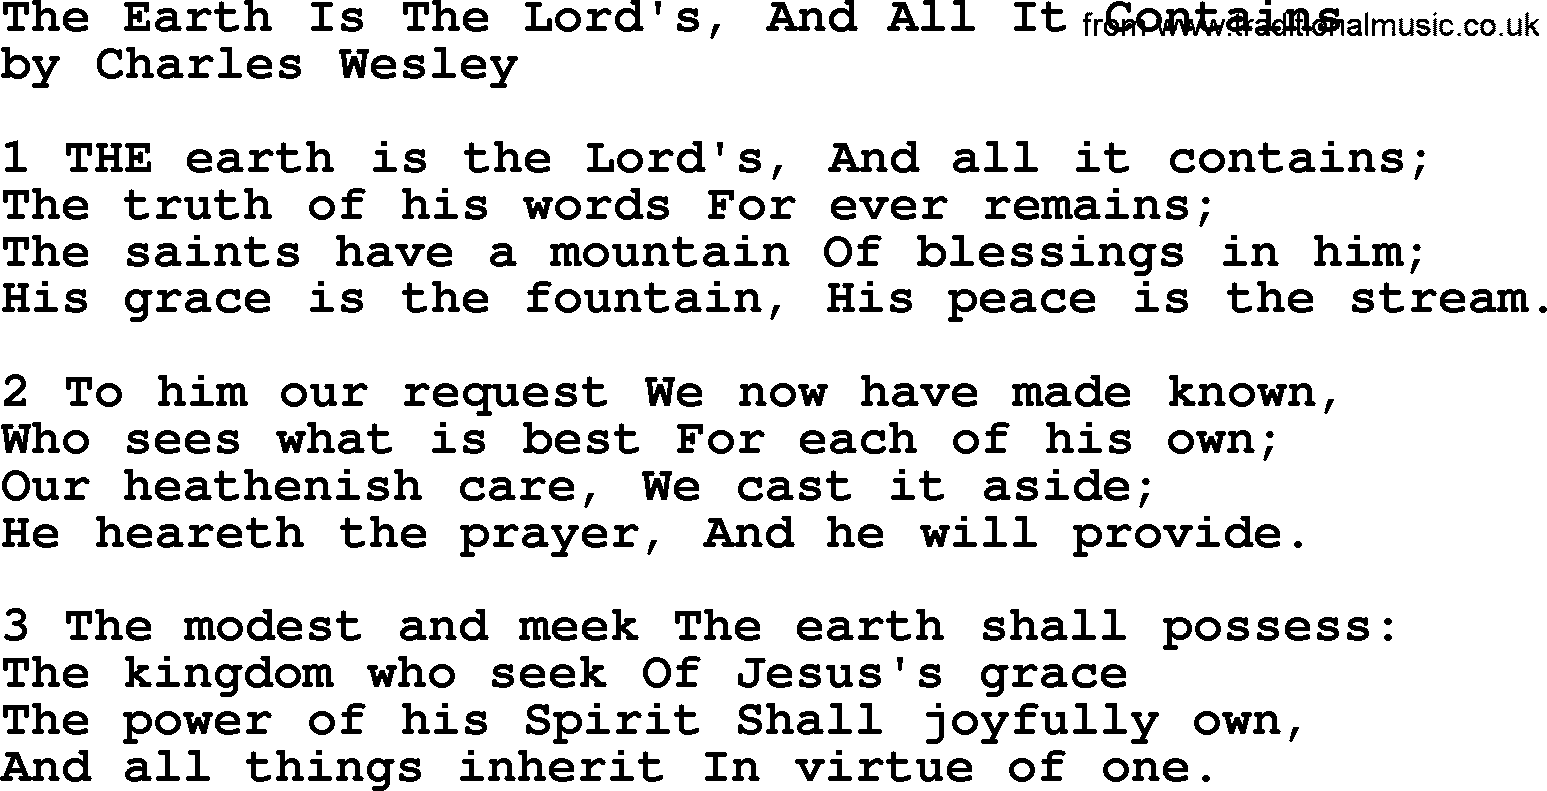 Charles Wesley hymn: The Earth Is The Lord's, And All It Contains, lyrics